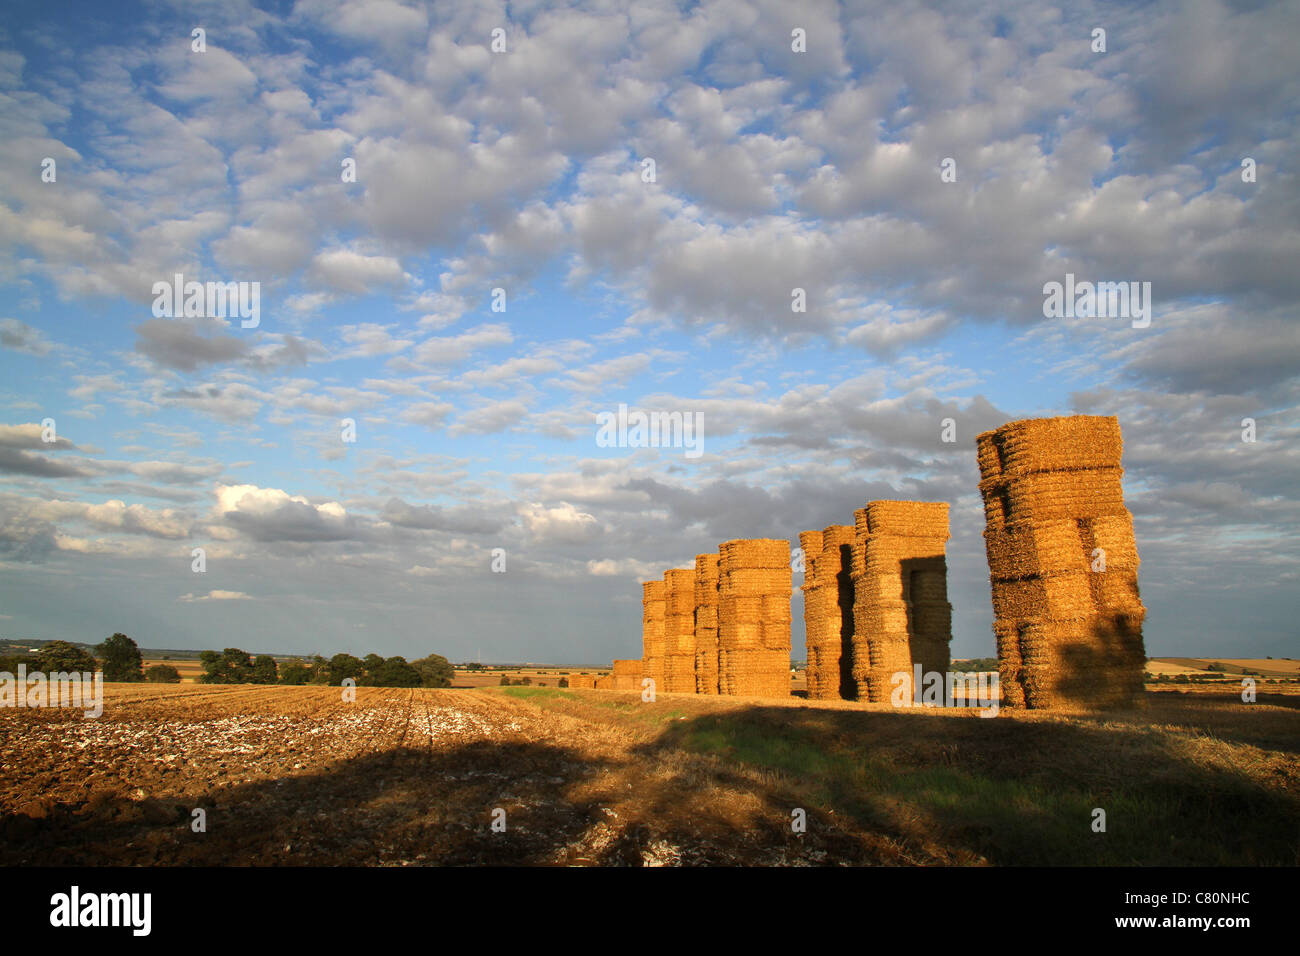 Rectangular bales of straw stacked in evening sun. Stock Photo